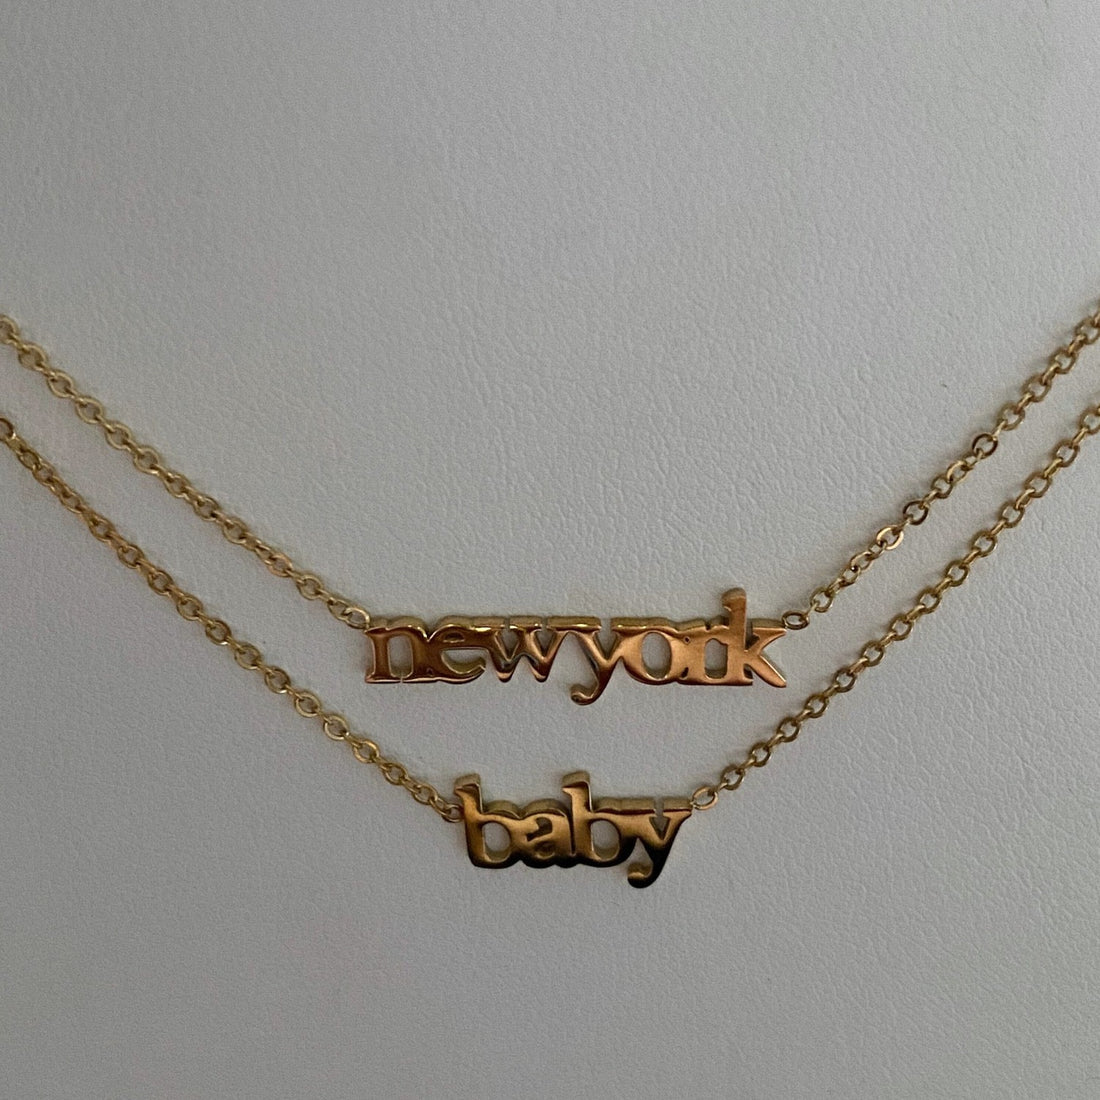 Dainty ‘Baby’ Necklace